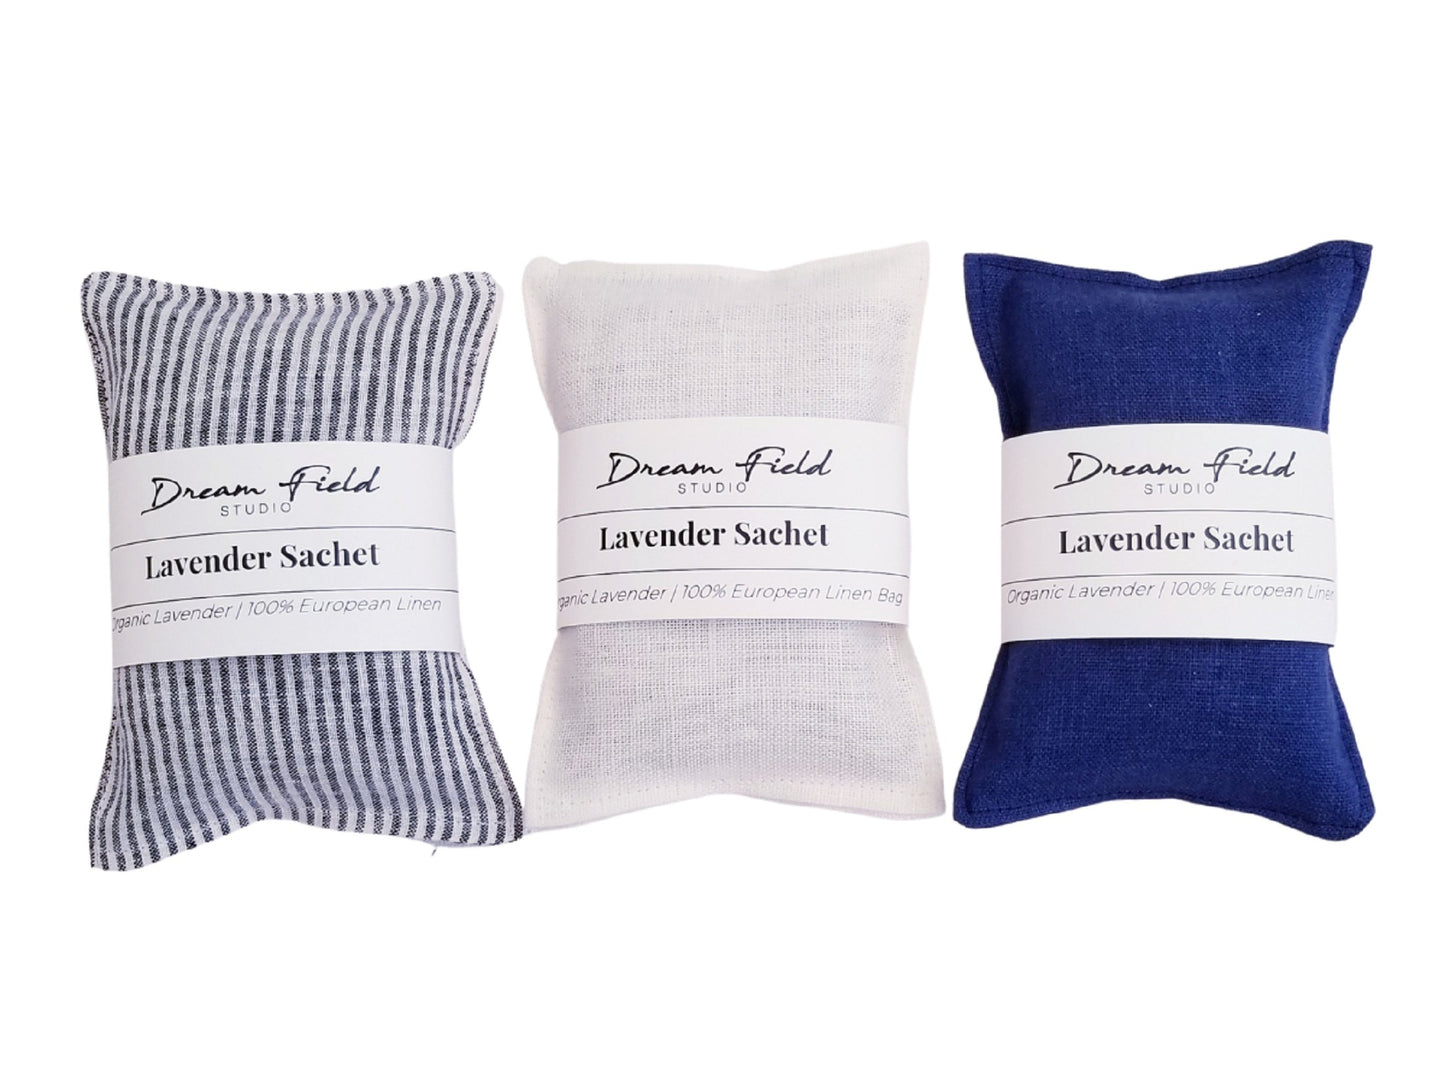 gift set of 3 organic lavender sachets with white, striped and navy blue linen